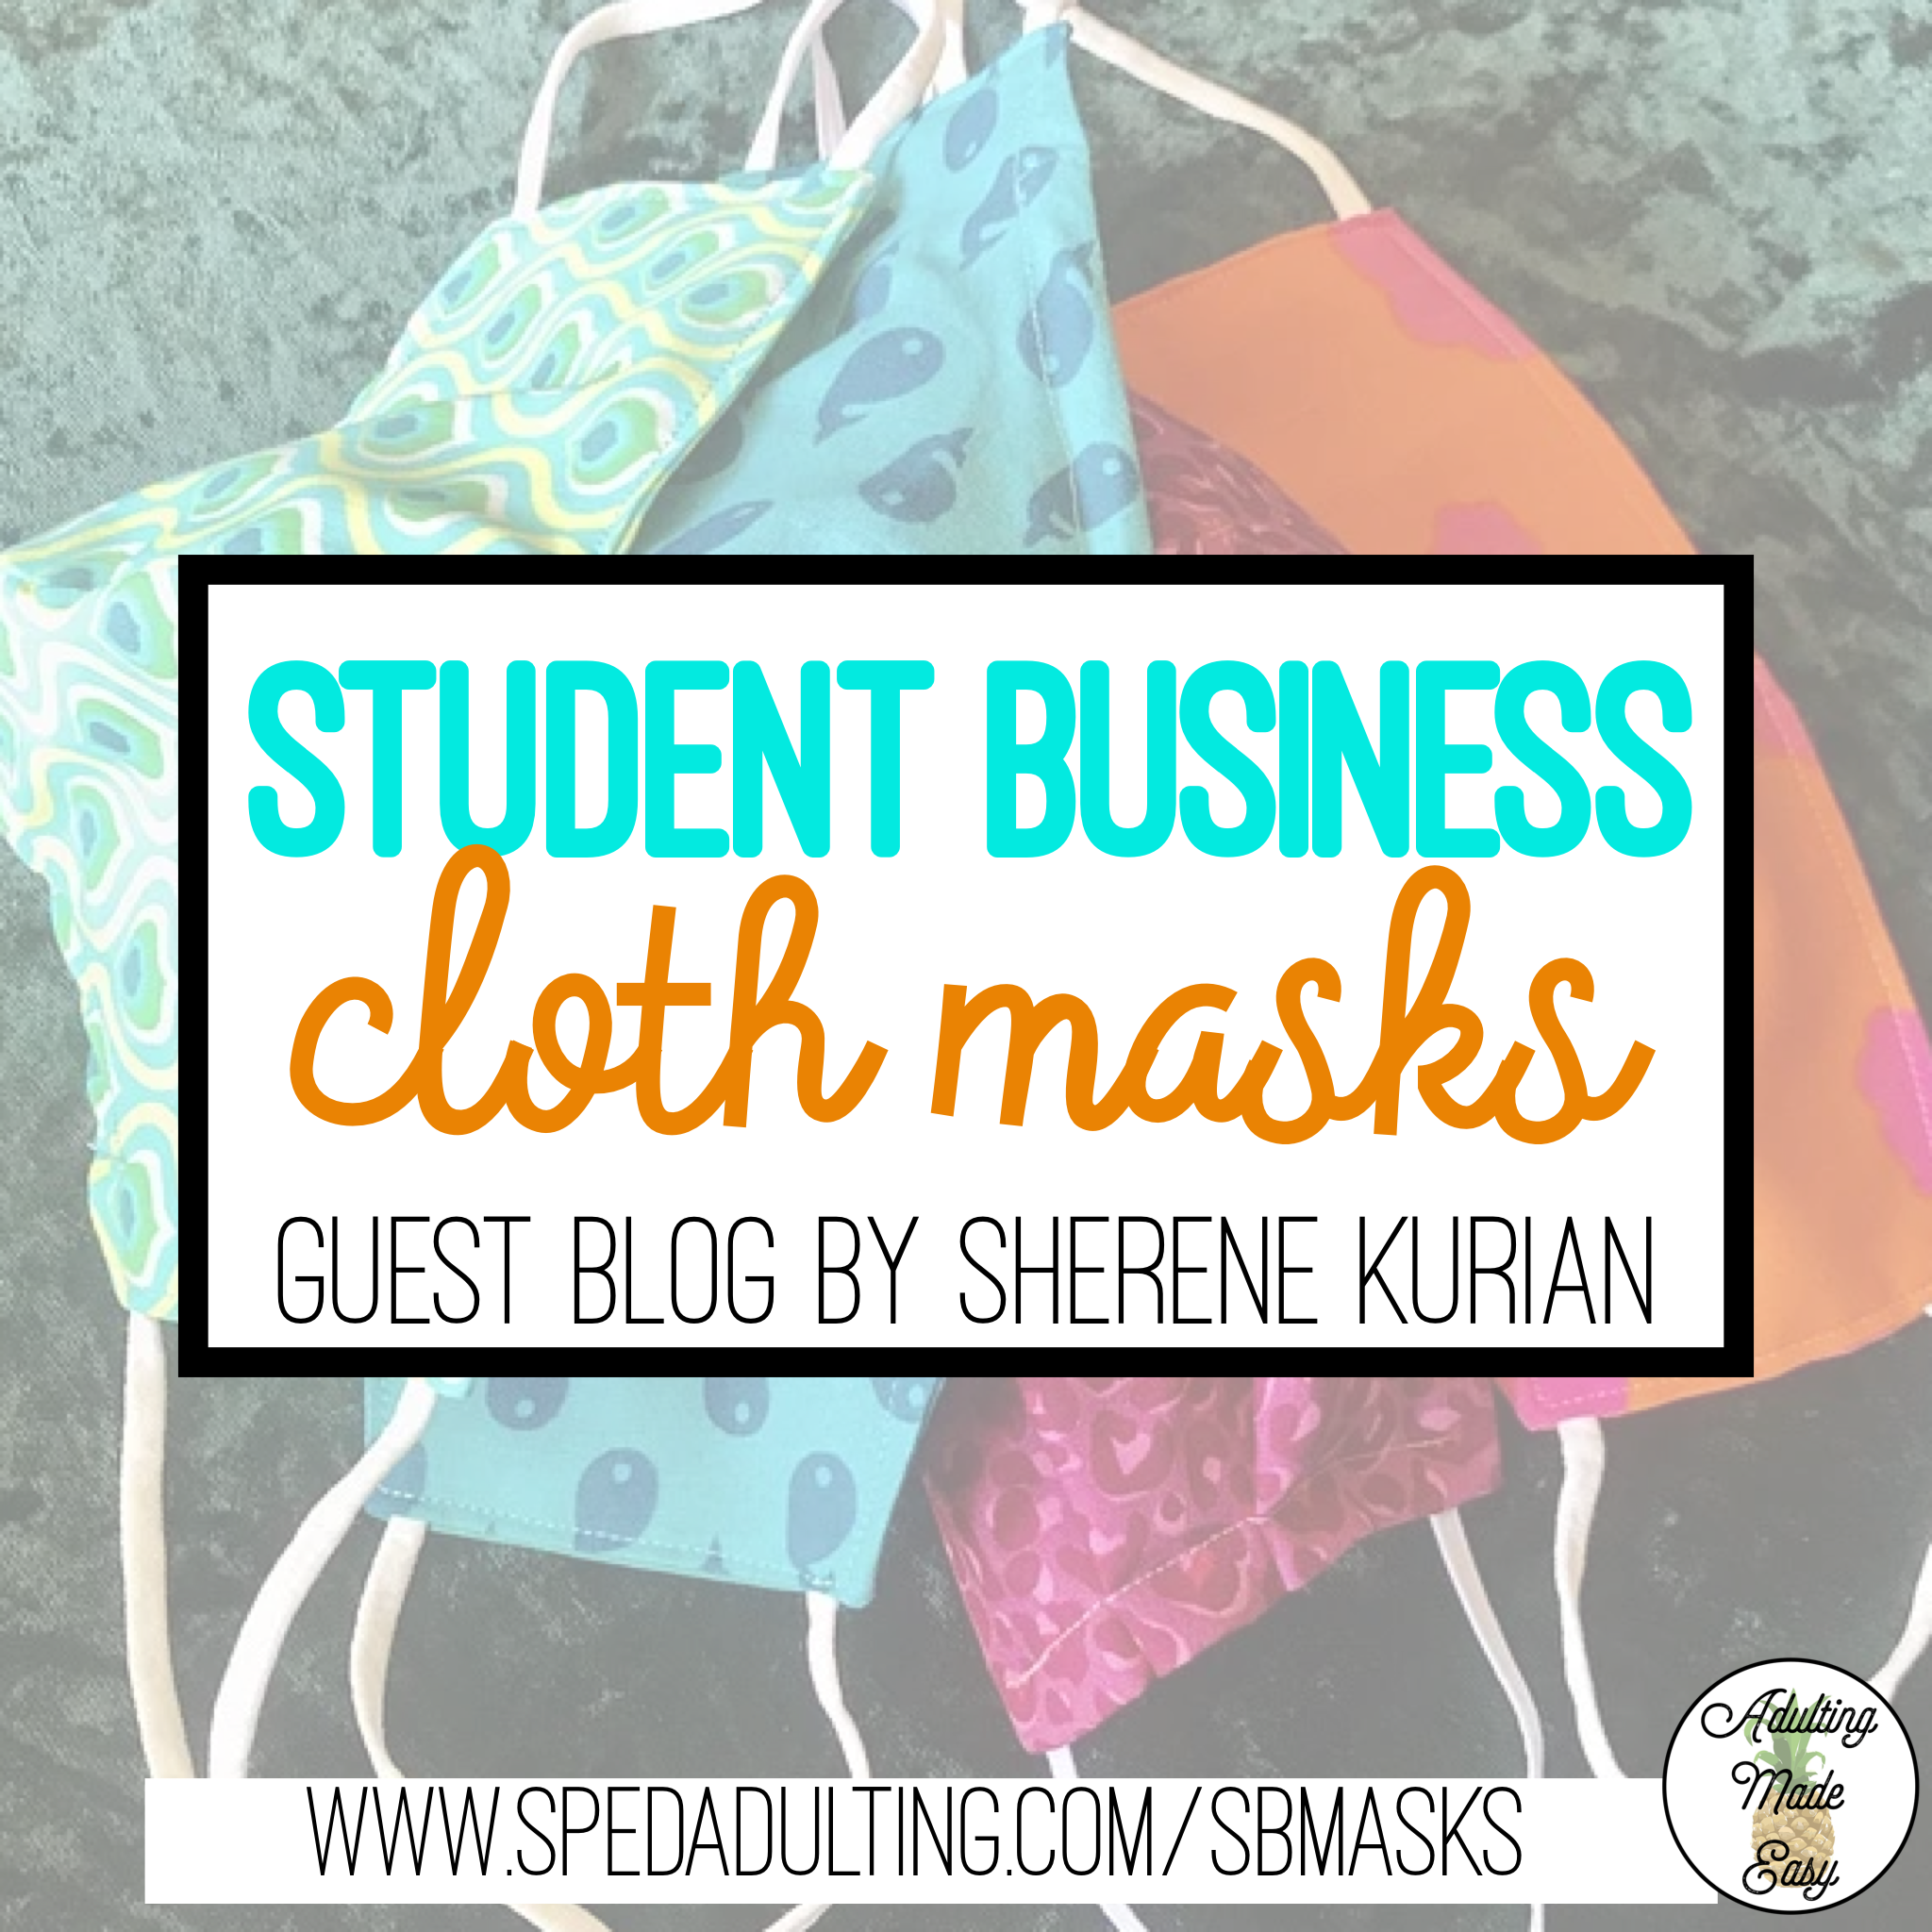 BLOG: Classroom student business selling cloth masks